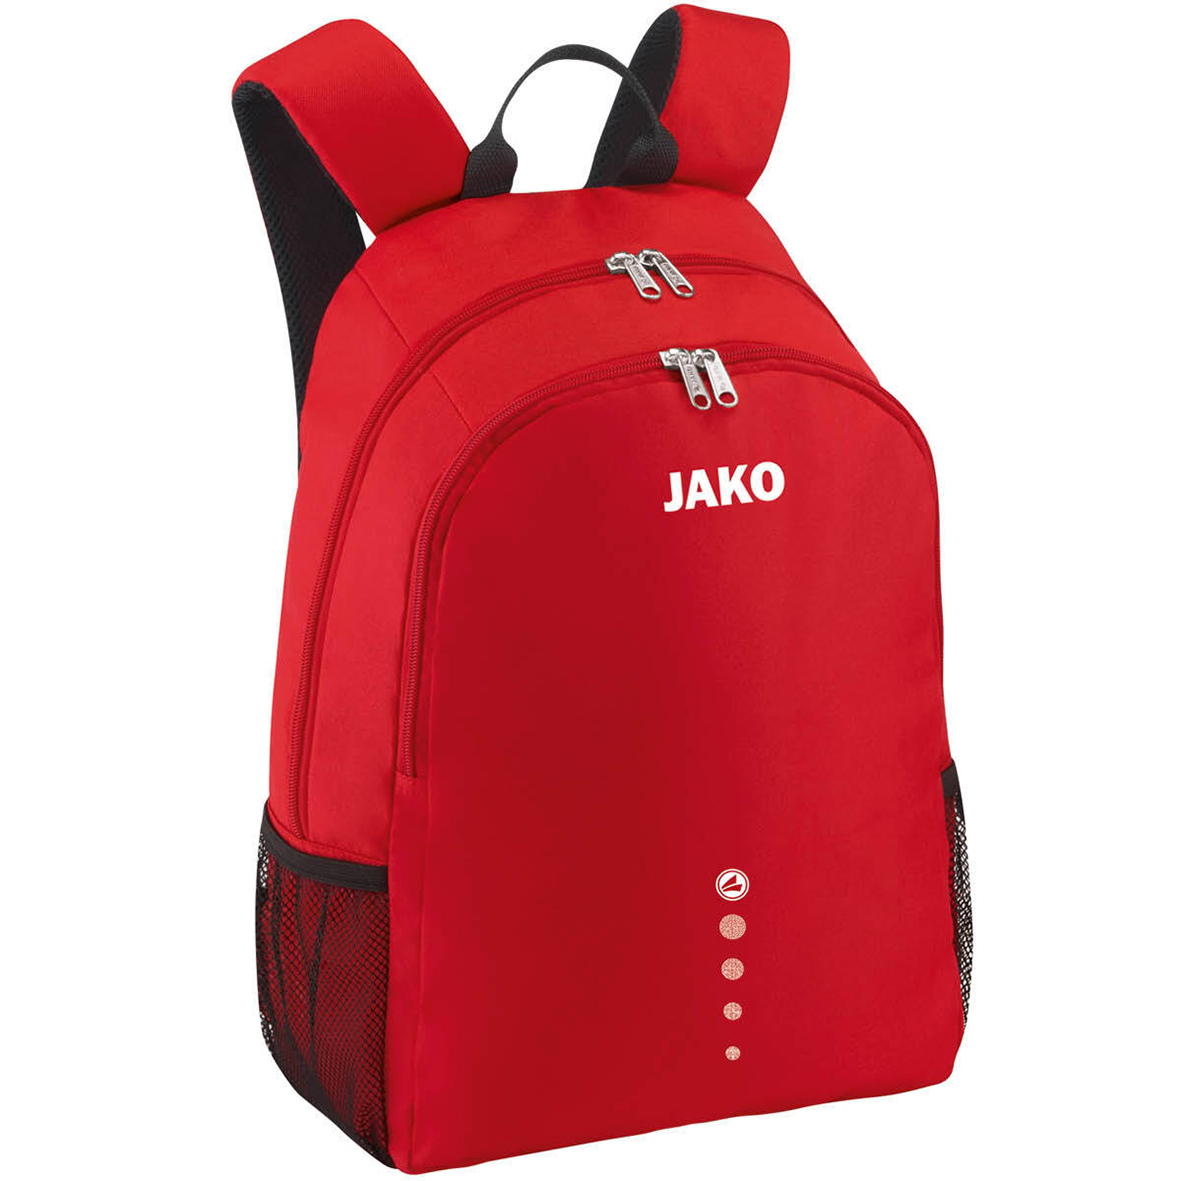 BACKPACK JAKO CLASSICO, RED.